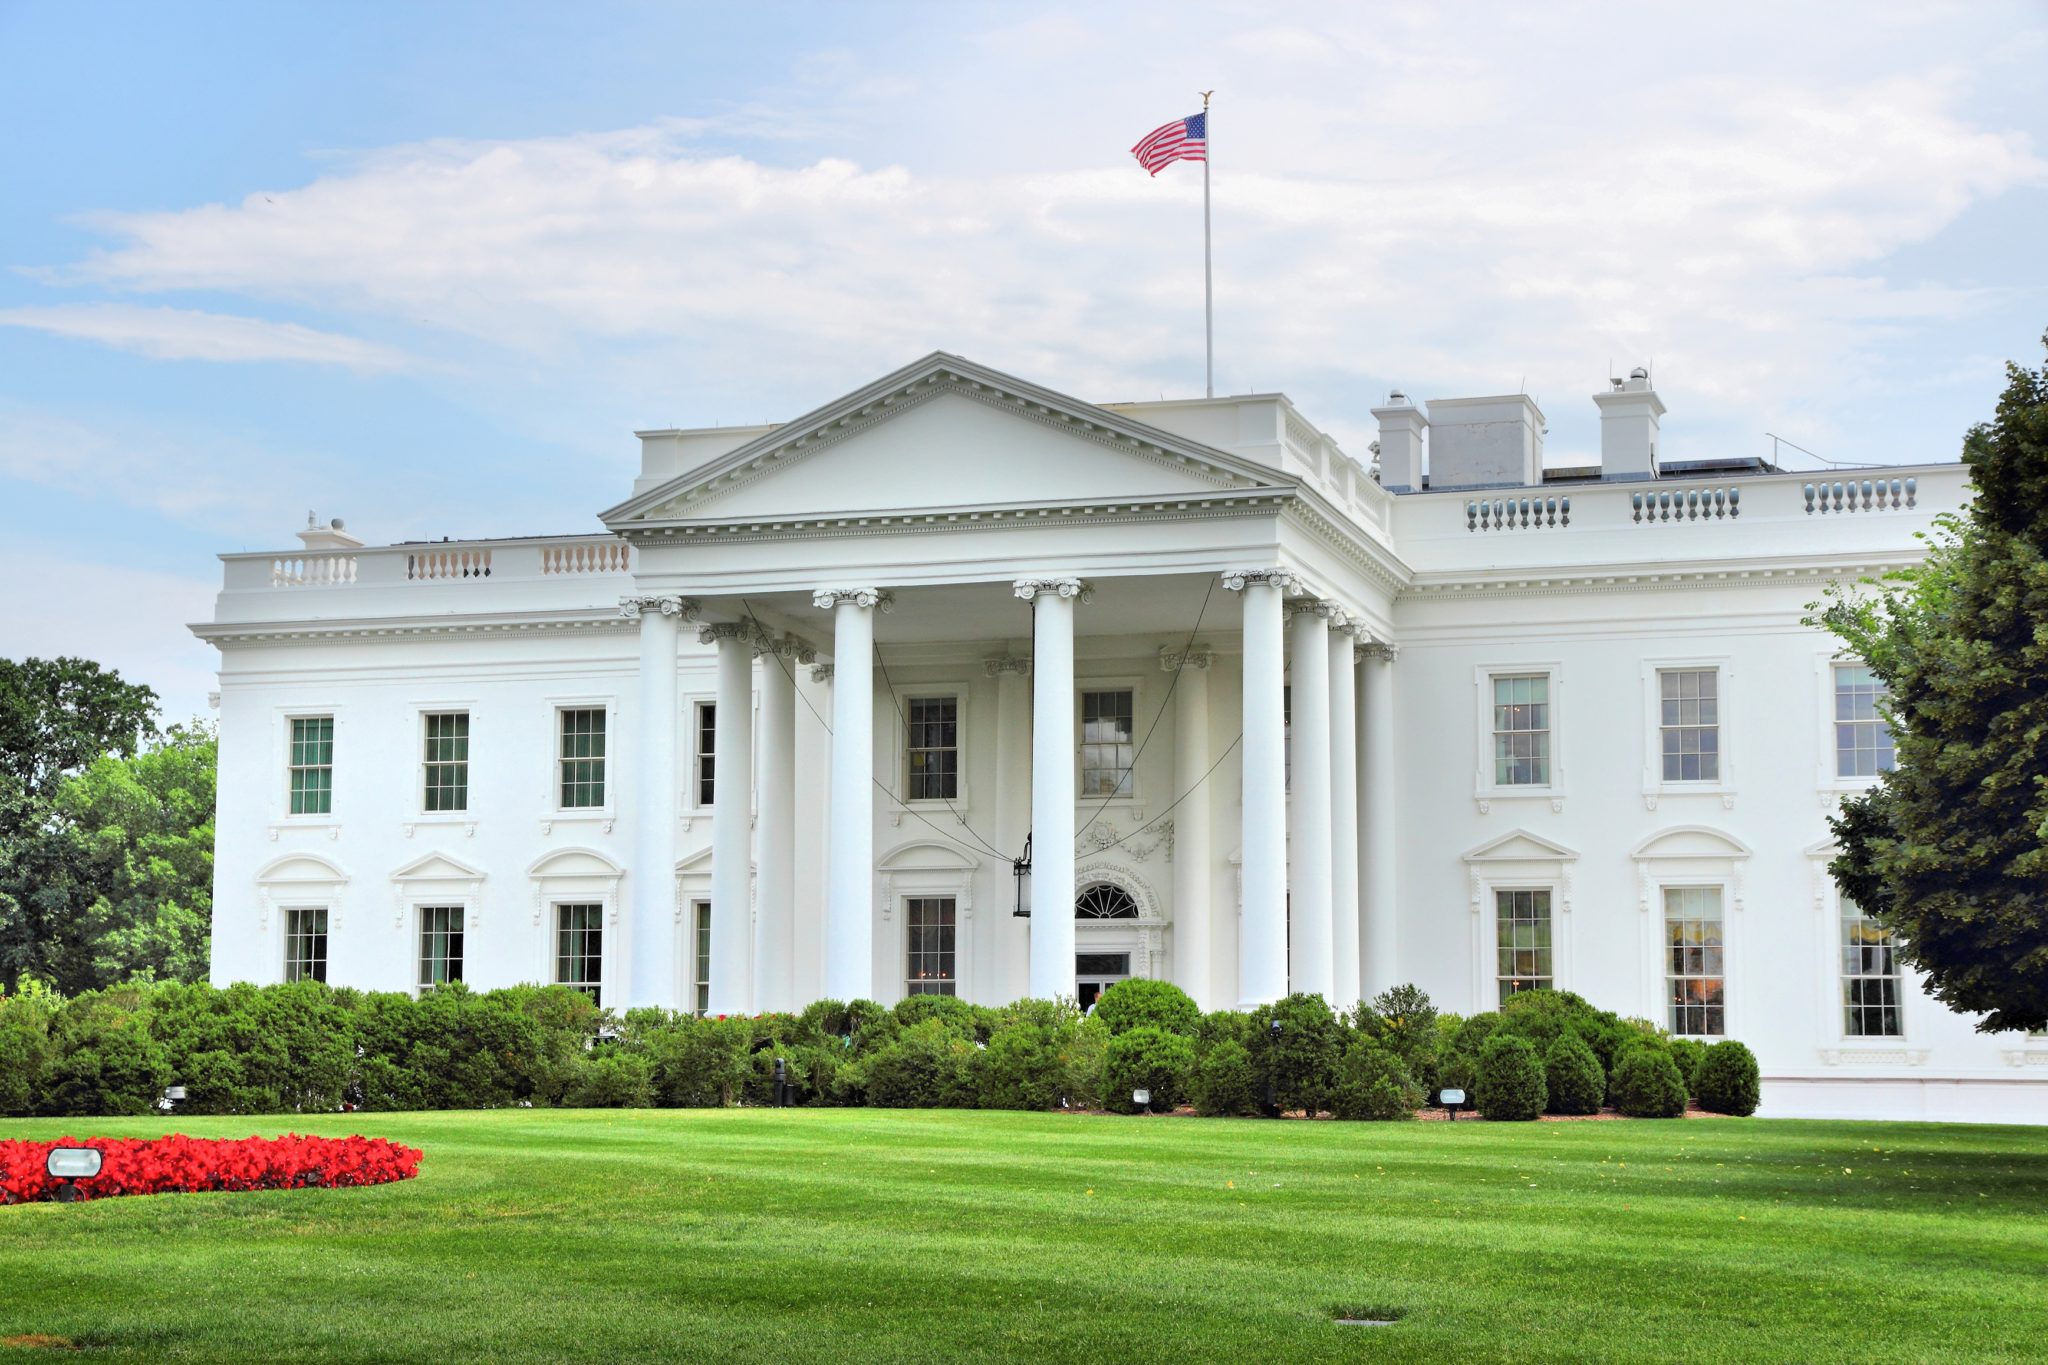 White House Wants To Free Up More Spectrum For Phones, 5G Home Internet, 6G and More